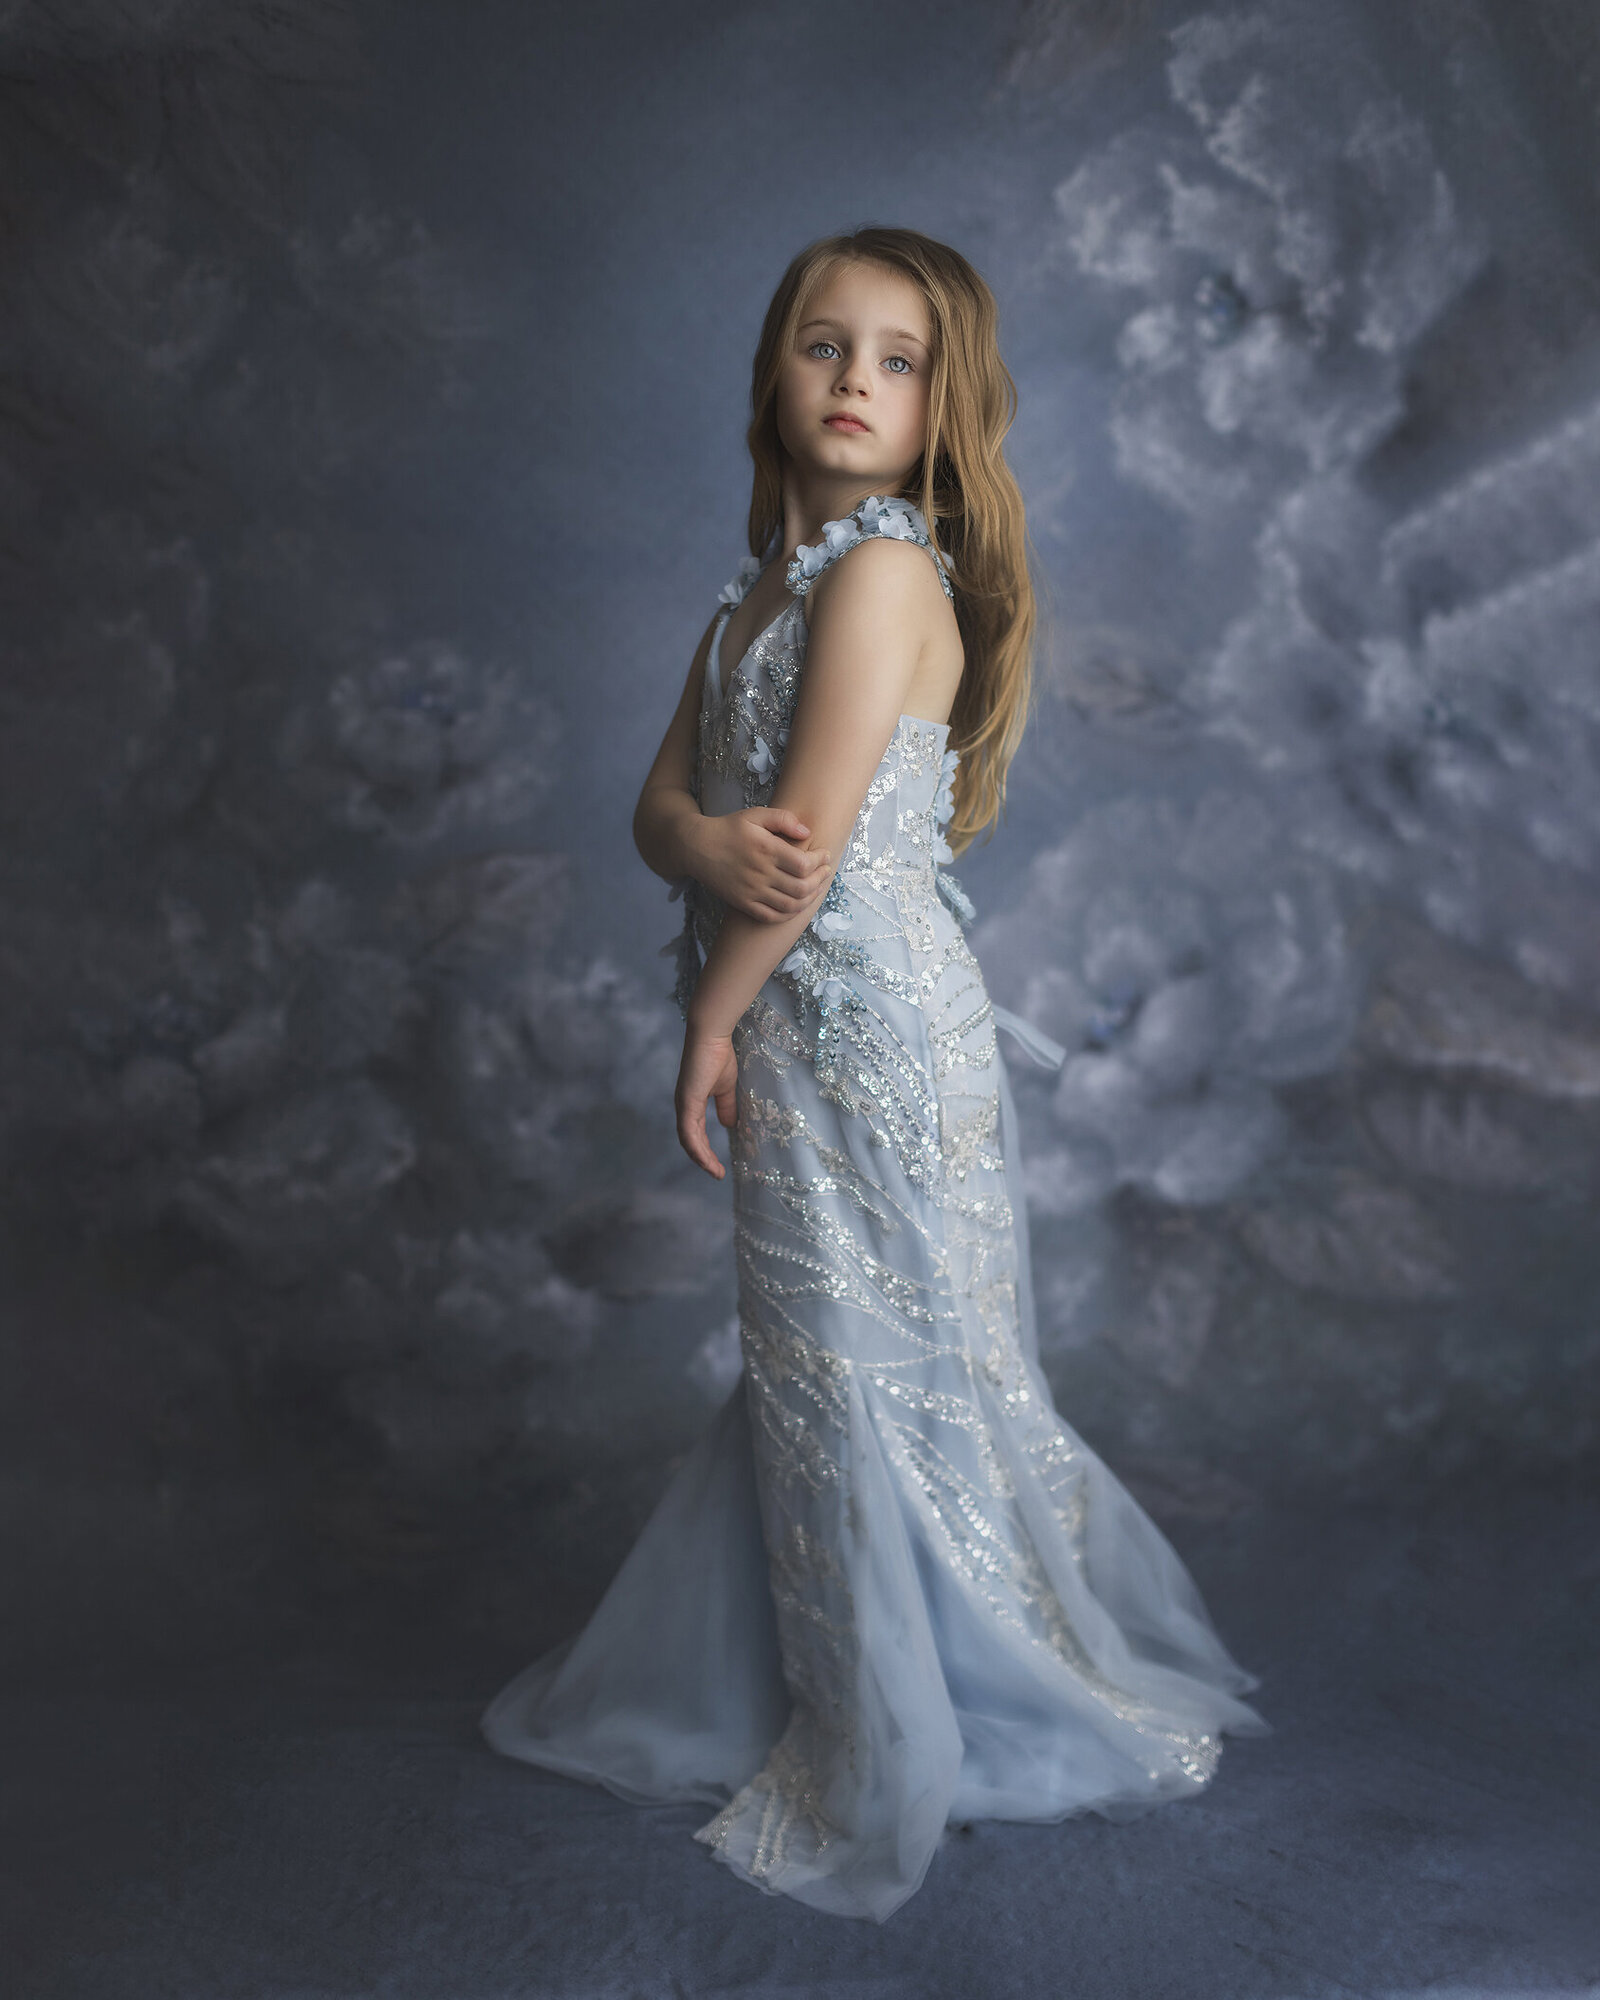 Girl wearing Before and Ever beaded gown for Fine Art photography.